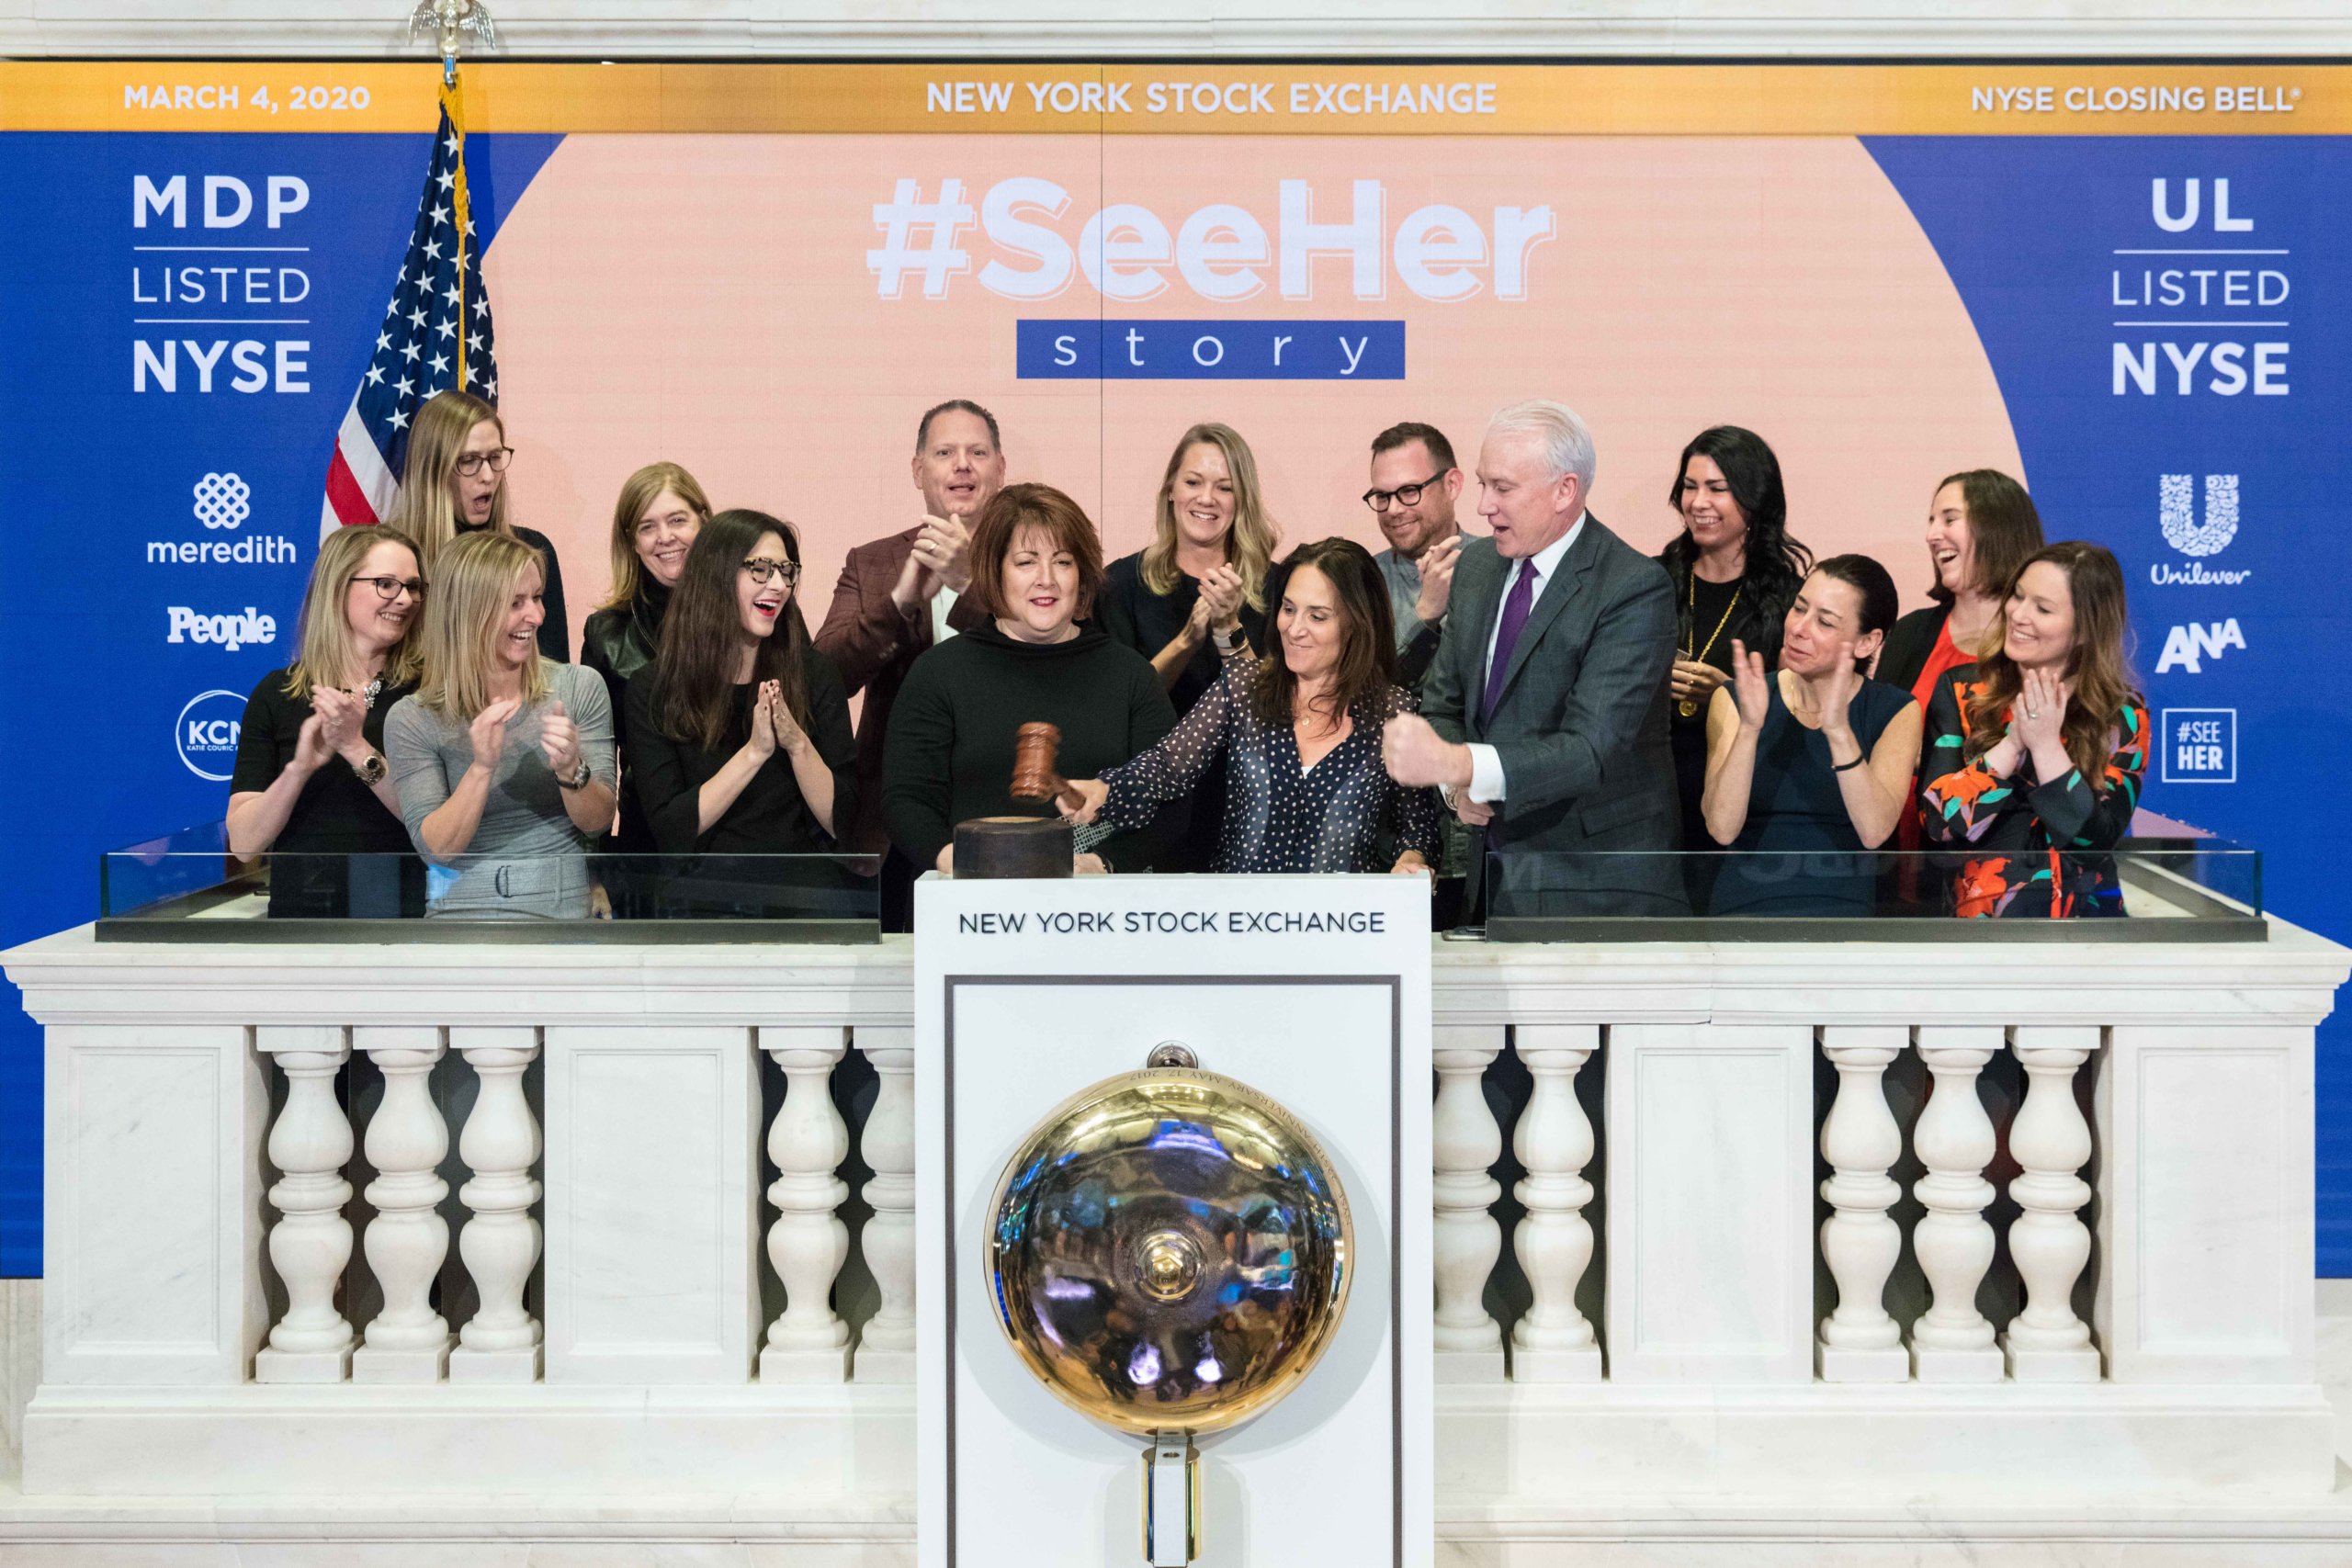 SeeHer Rings the Closing Bell at NYSE